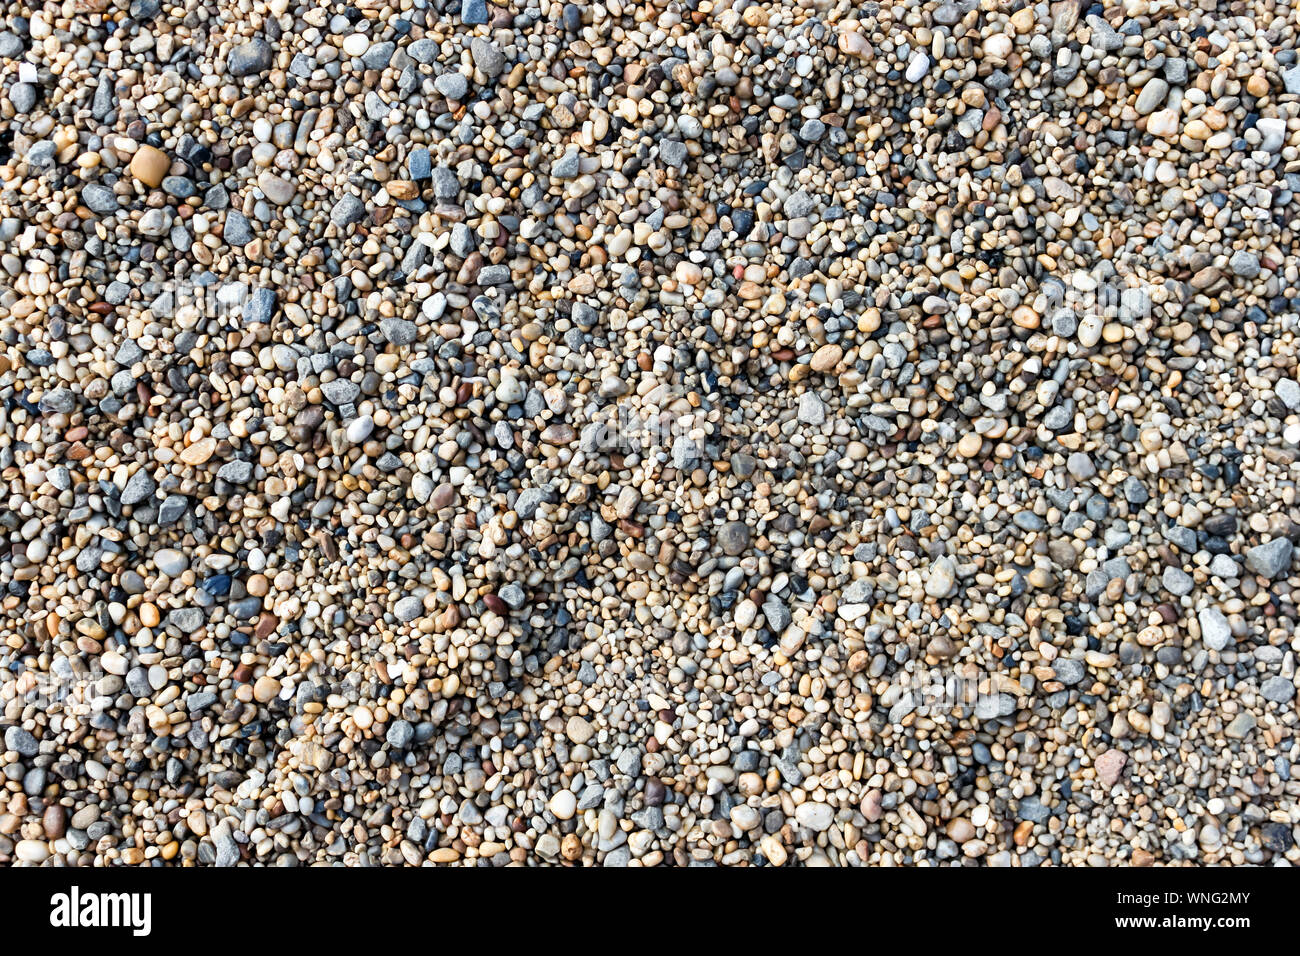 Abstract texture background of natural round peeble stone, fine gravel, shingle. Top view of naturally polished sea rocks from a beach shore. Text cop Stock Photo